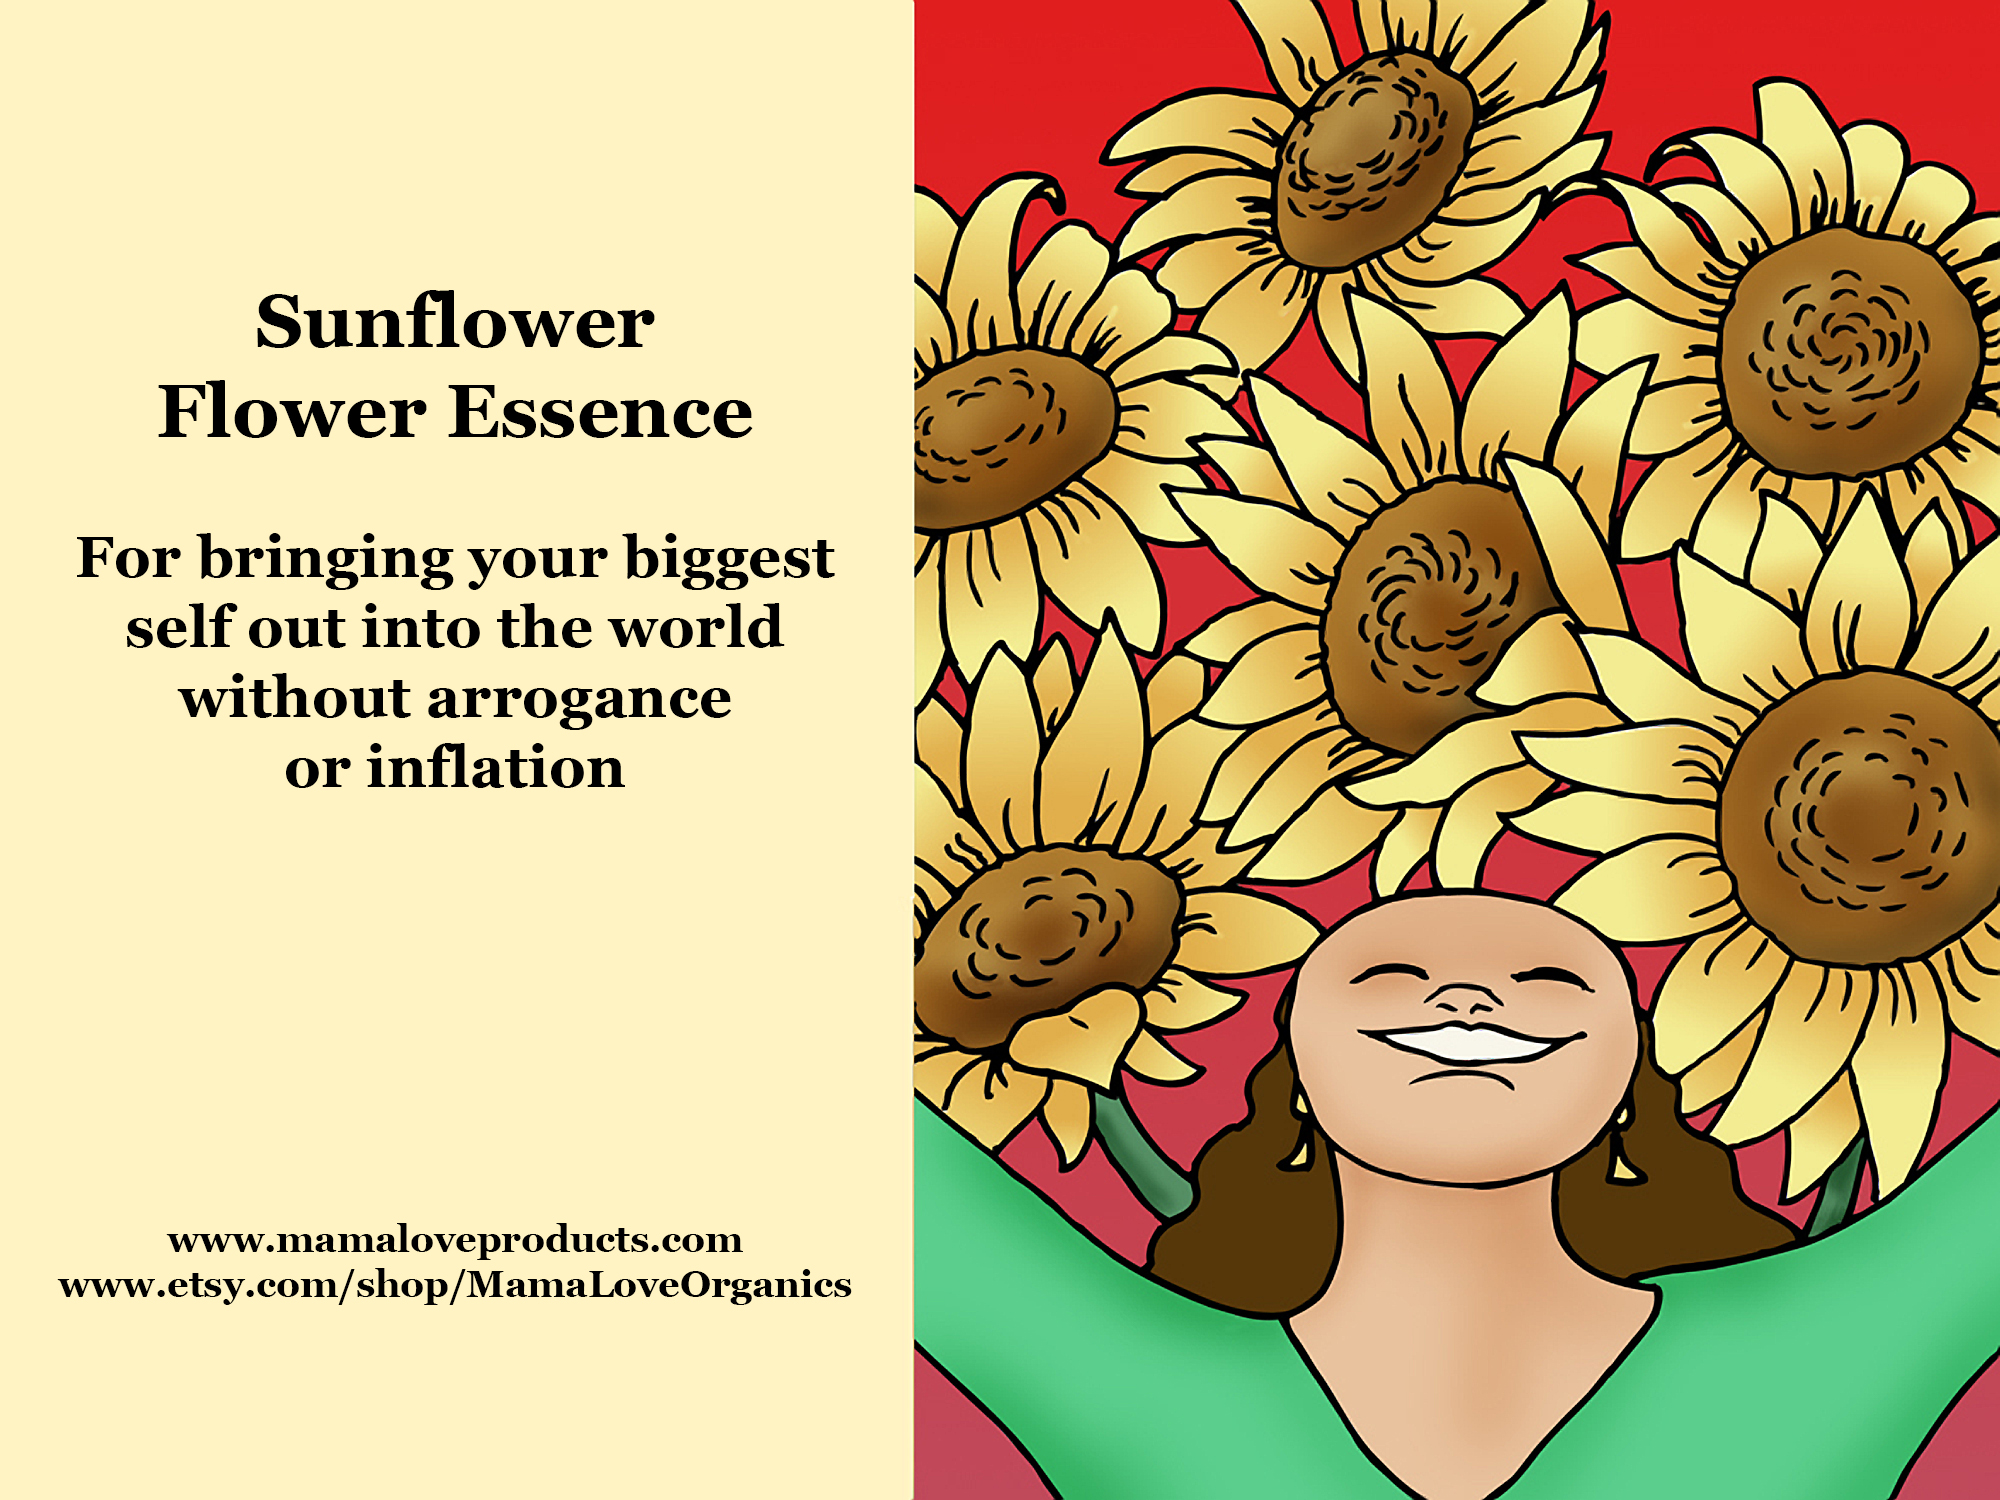 Be Your Biggest Self with Sunflower Flower Essence